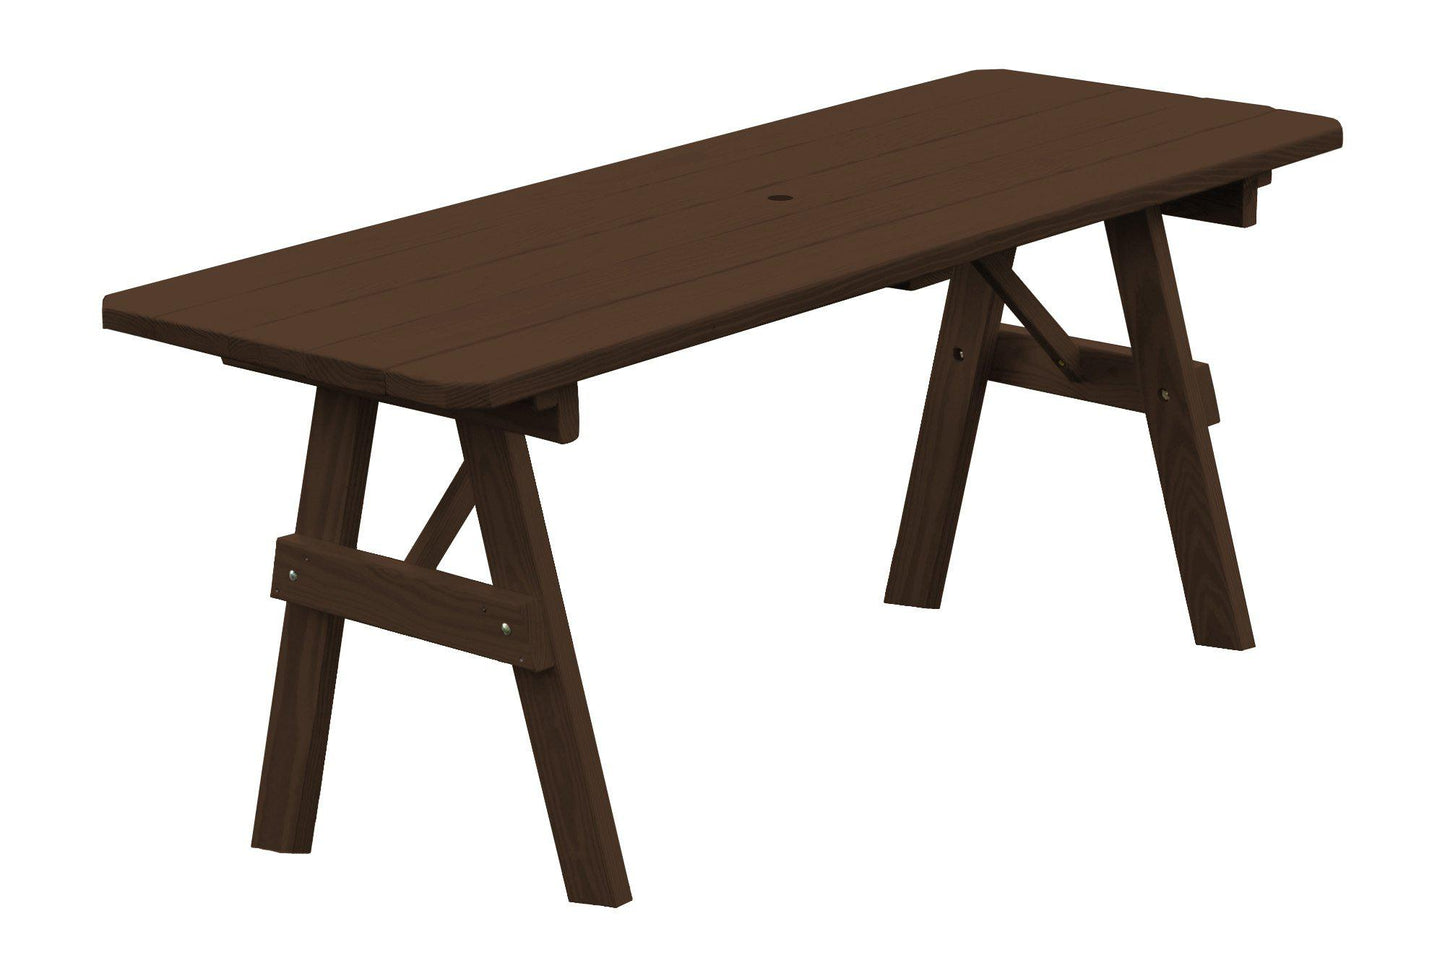 A&L Furniture Co. Yellow Pine 5' Traditional Table Only - Specify for Umbrella Hole - LEAD TIME TO SHIP 10 BUSINESS DAYS